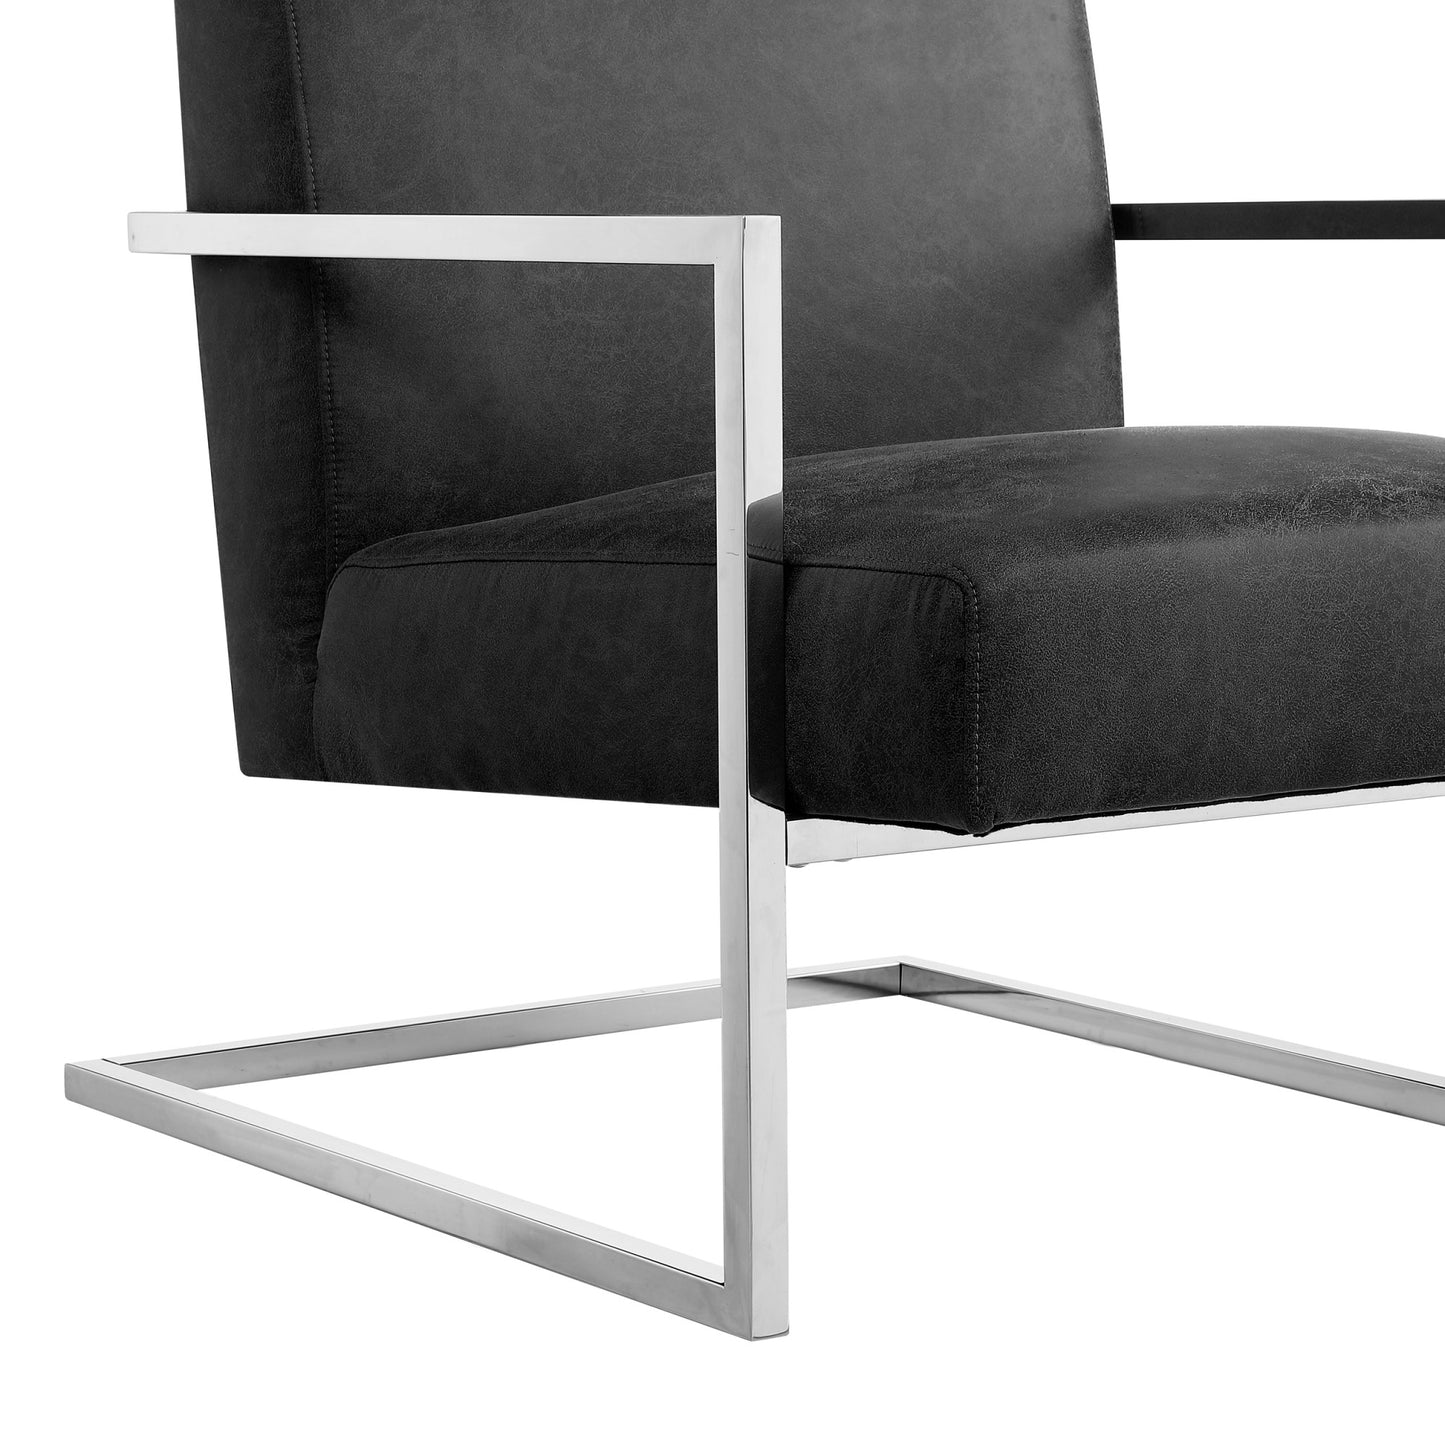 27" Charcoal And Silver Faux leather Arm Chair